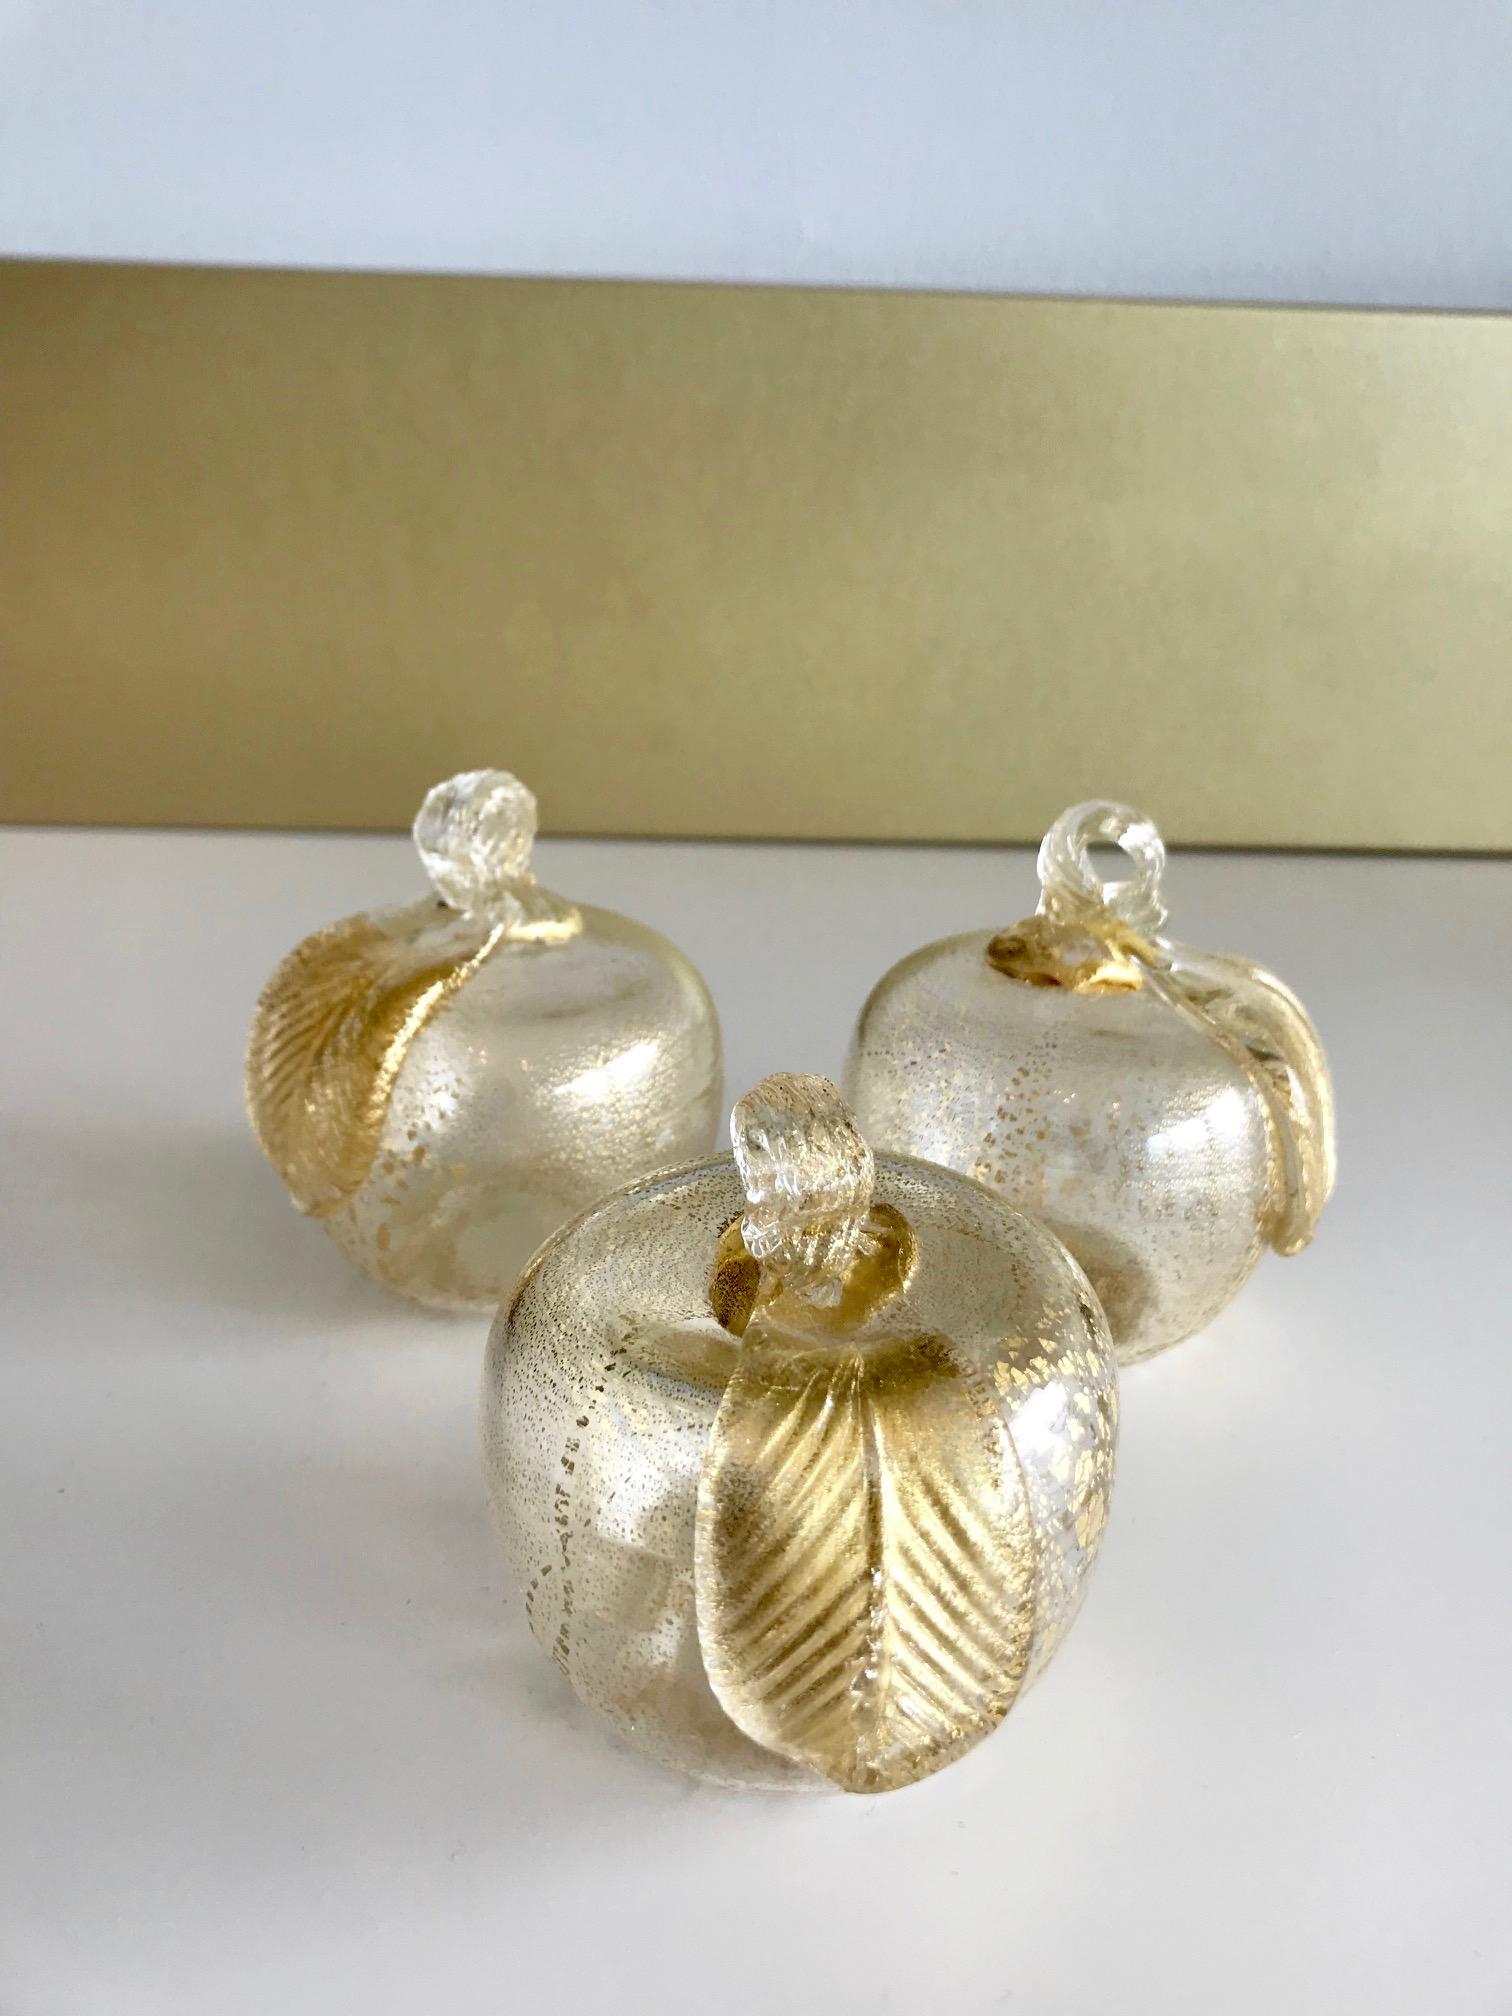 Set of three gorgeous hand blown Murano figurines in the form of apples with 24-karat gold mica flecks. The apples feature gorgeous scrolled stems with stylized fluted leaf detail. Great as table top or desk accessories.